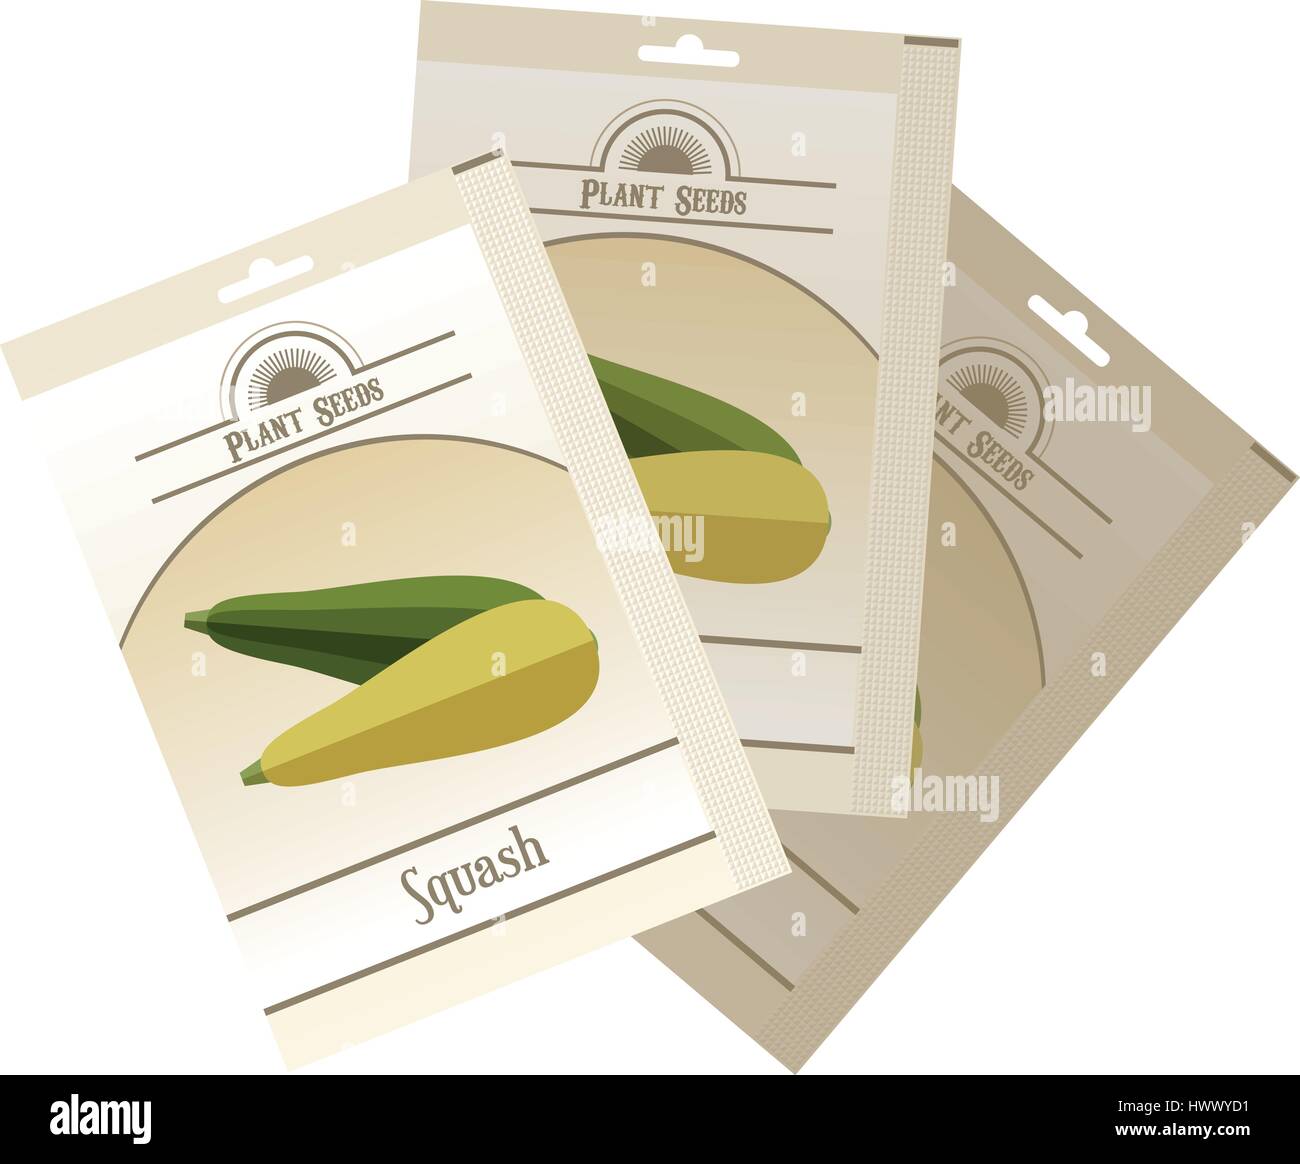 Pack of Squash seeds icon Stock Vector